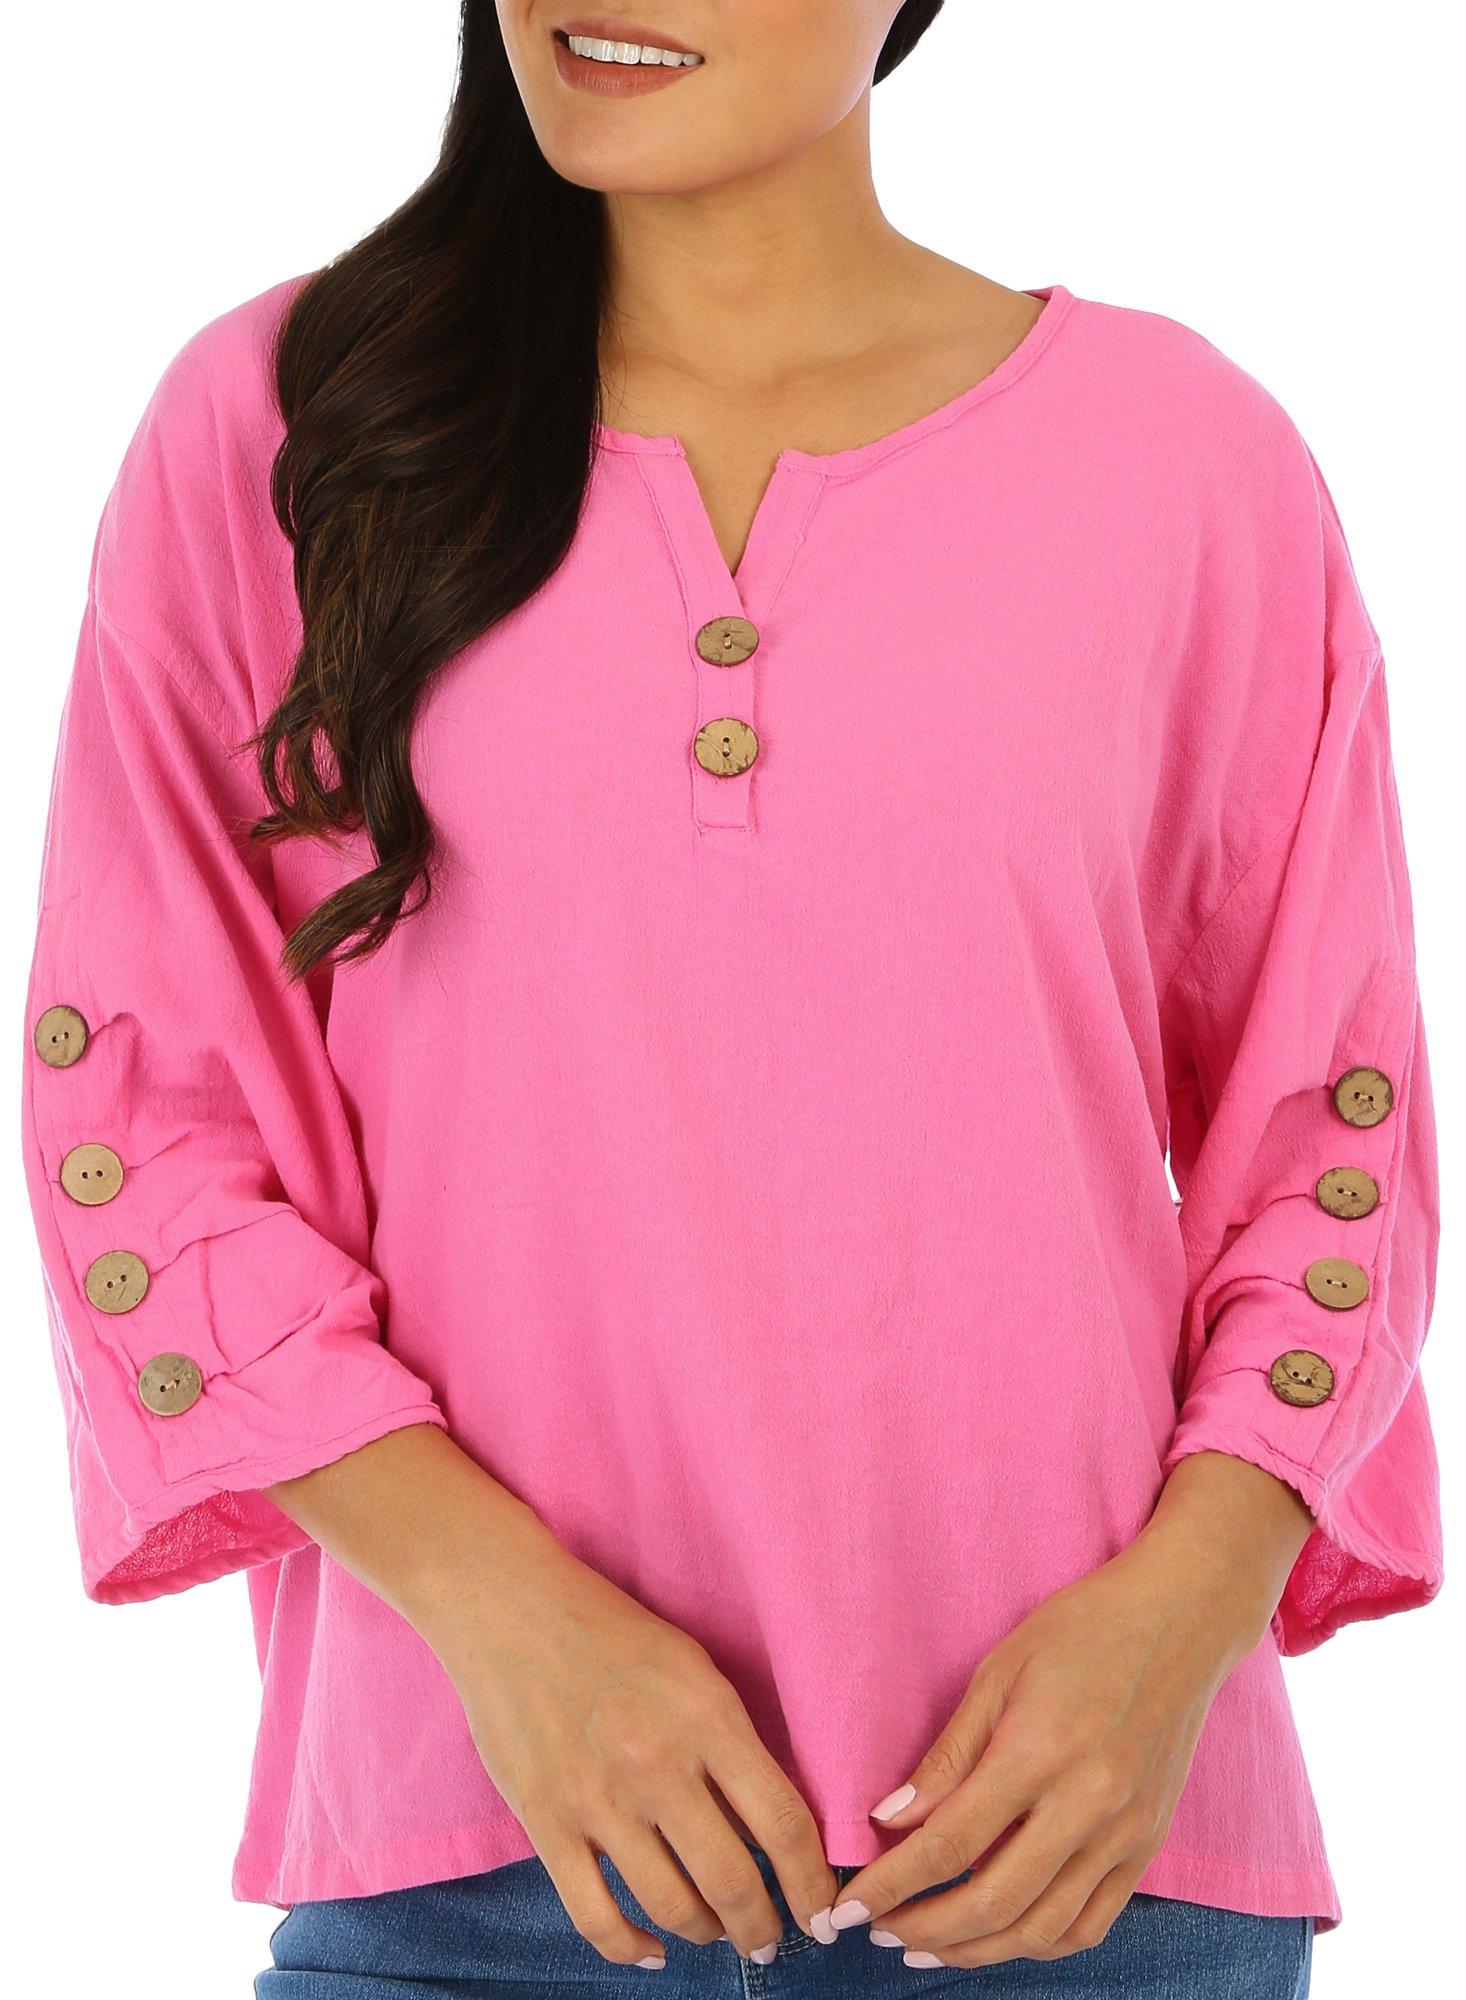 Juniper + Lime Womens Coconut Shell Buttons 3/4 Sleeve Top